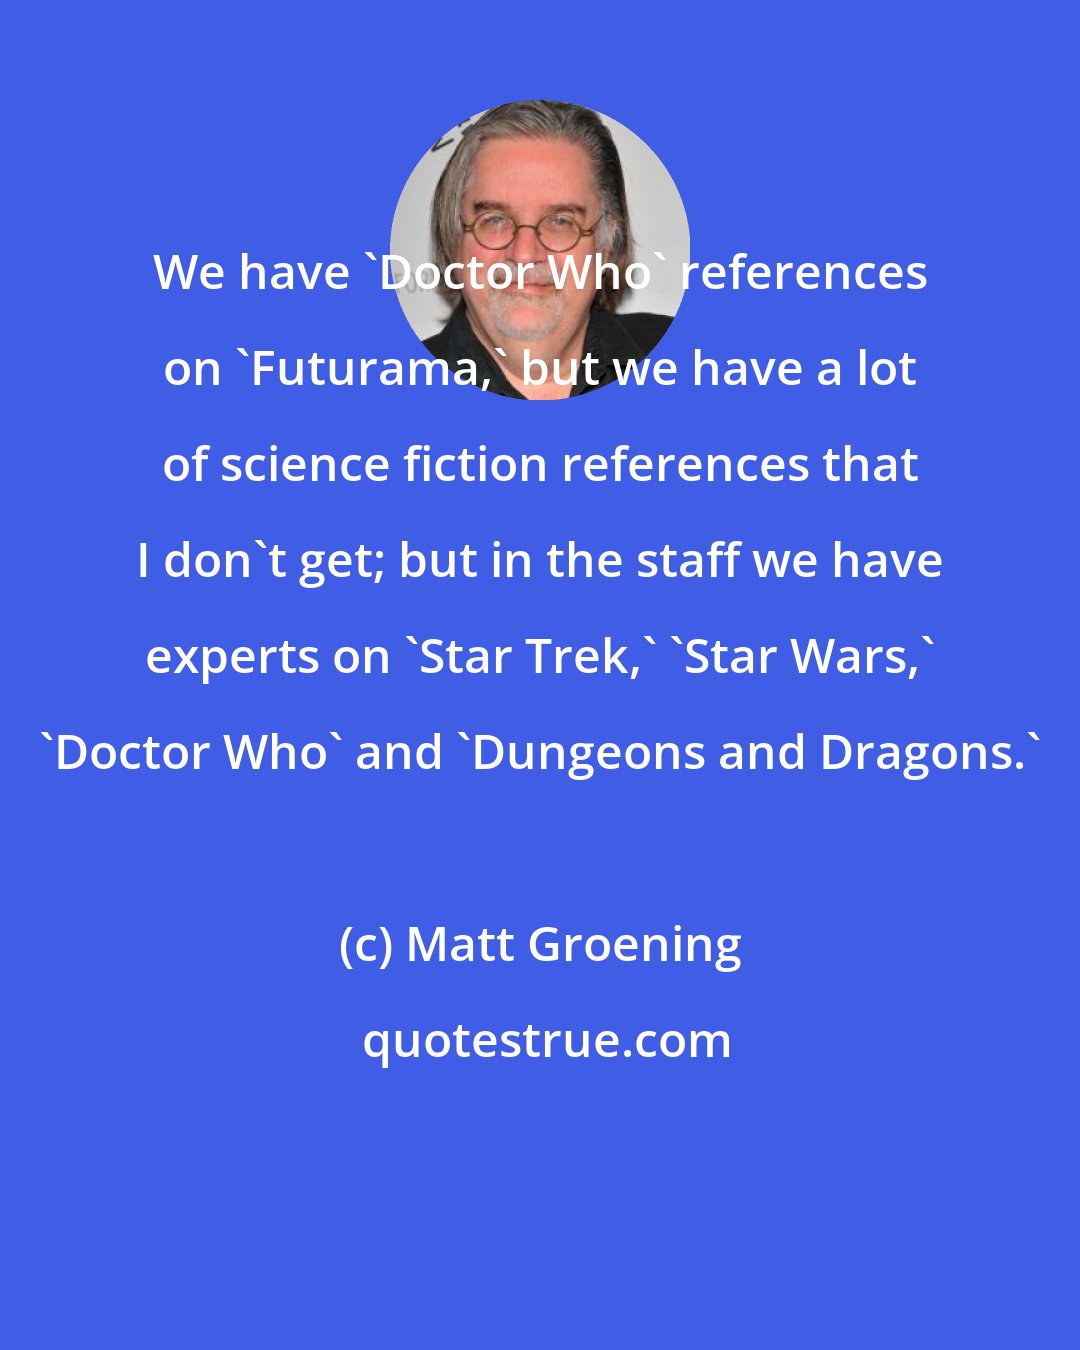 Matt Groening: We have 'Doctor Who' references on 'Futurama,' but we have a lot of science fiction references that I don't get; but in the staff we have experts on 'Star Trek,' 'Star Wars,' 'Doctor Who' and 'Dungeons and Dragons.'